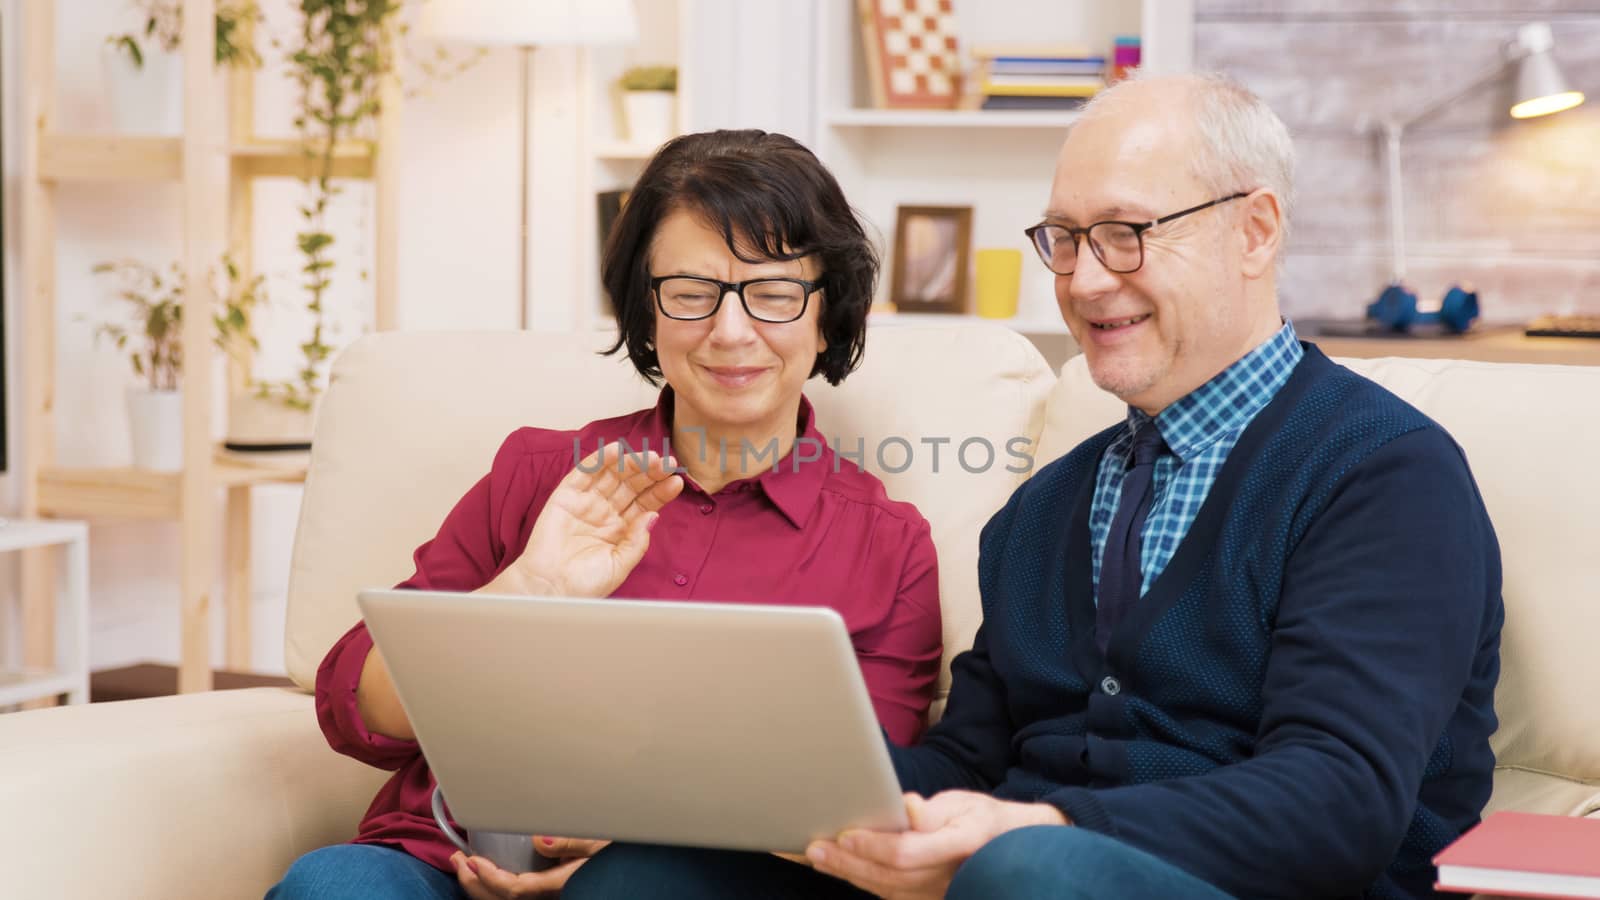 Elderly age couple sitting on sofa holding laptop during a video call. Couple waving at laptop.